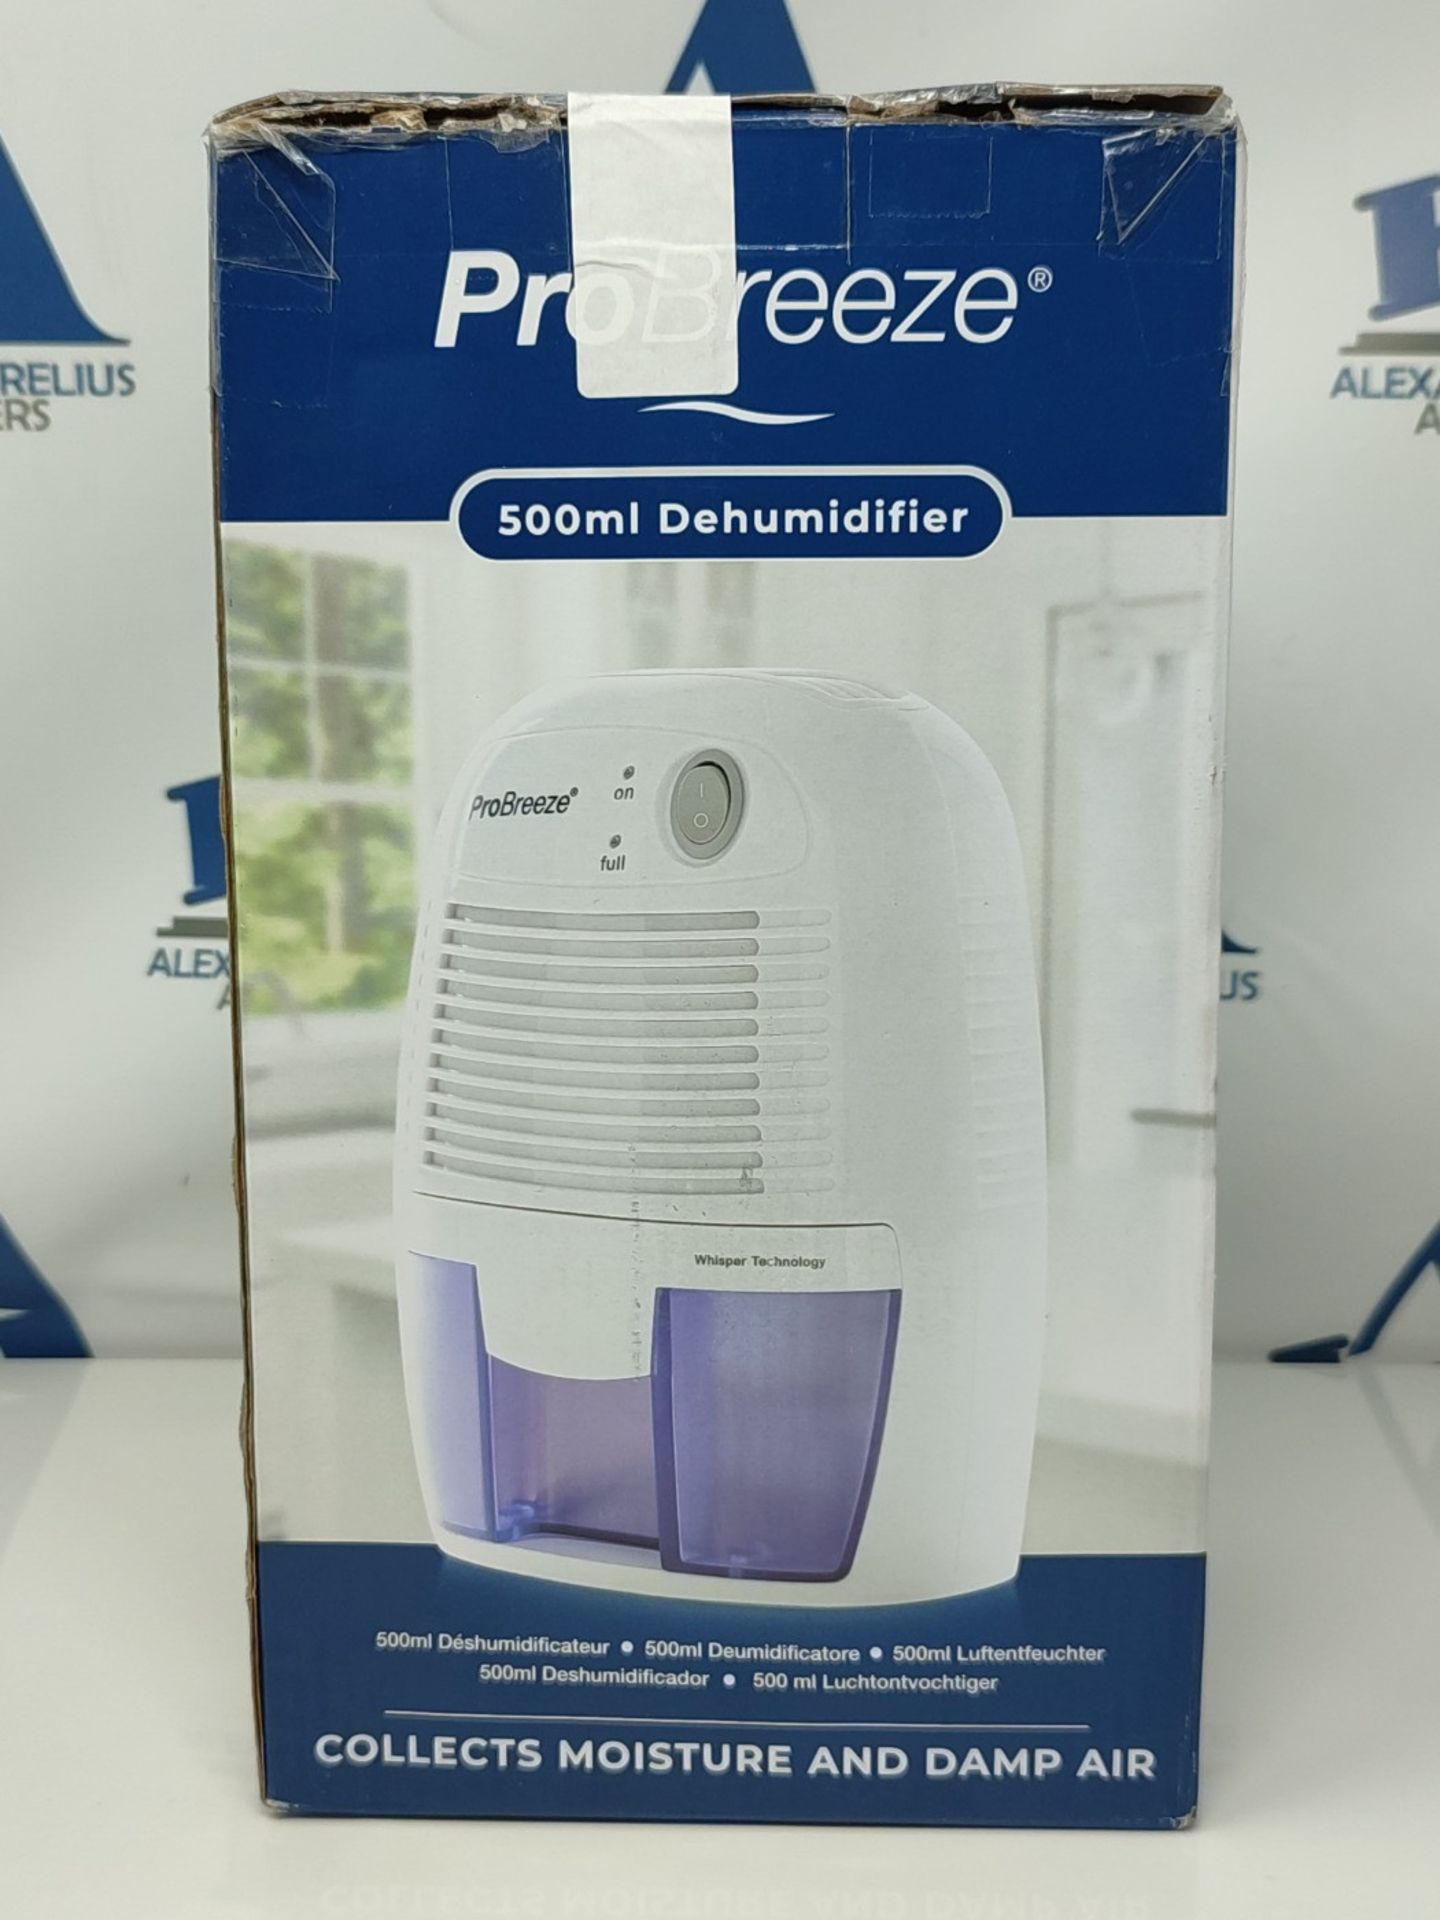 Pro Breeze Dehumidifier 500ml Compact and Portable Mini Air Dehumidifier for Damp, Mou - Image 3 of 3